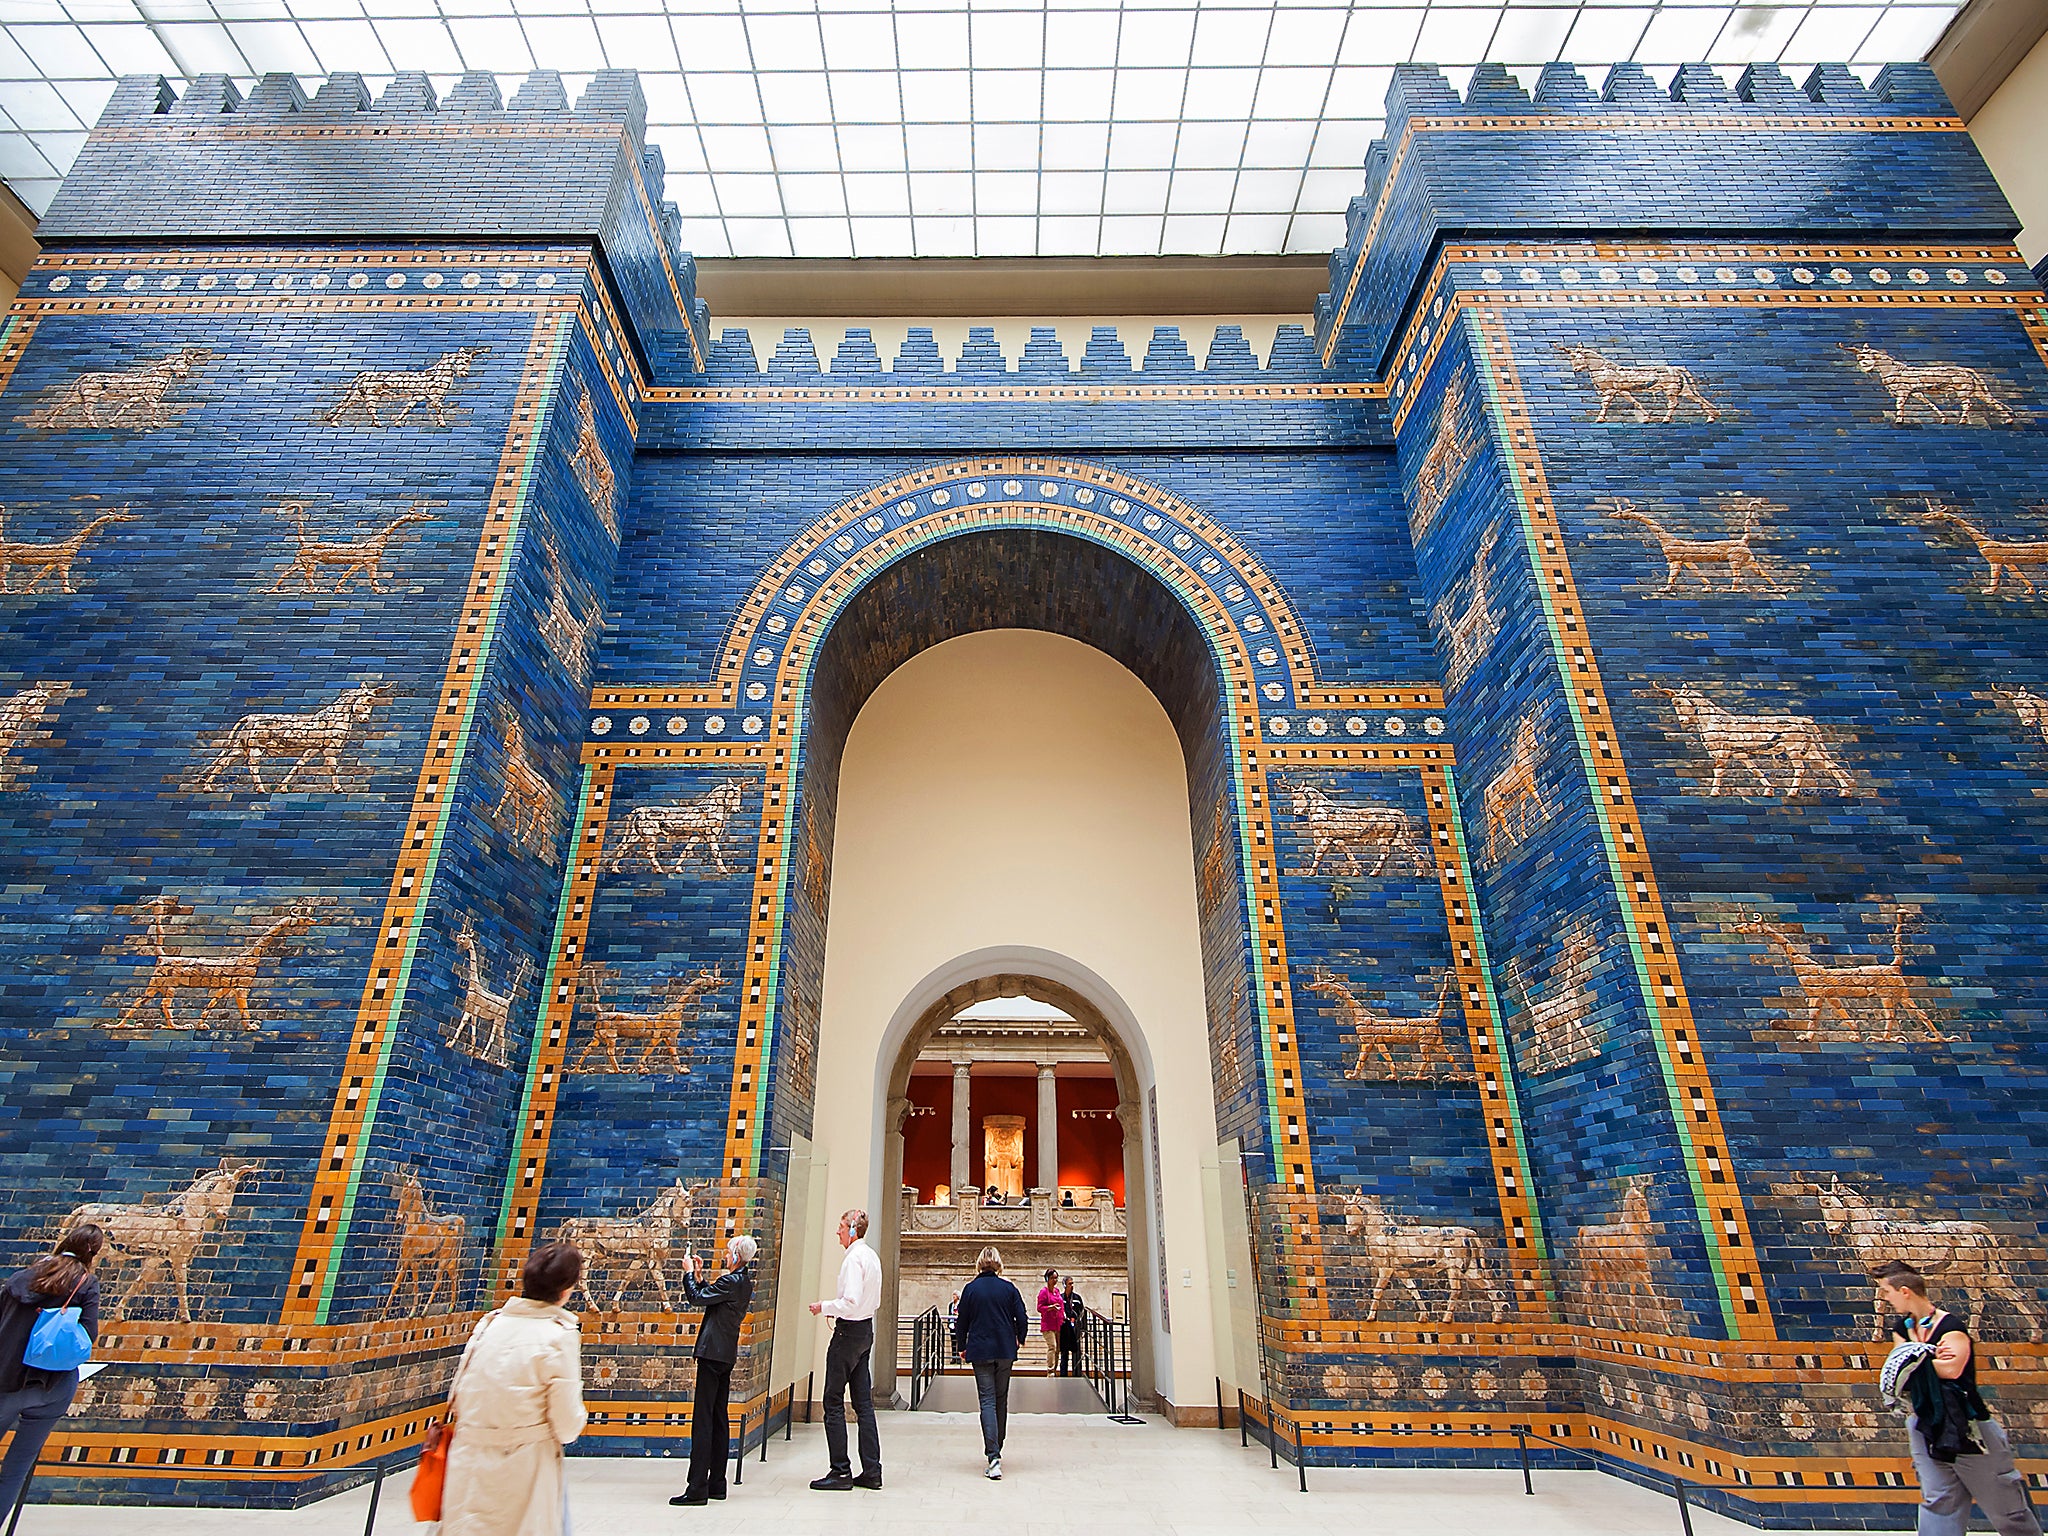 The Ishtar Gate comes from Babylon in modern-day Iraq. Would it have survived the 1991 war on Iraq?